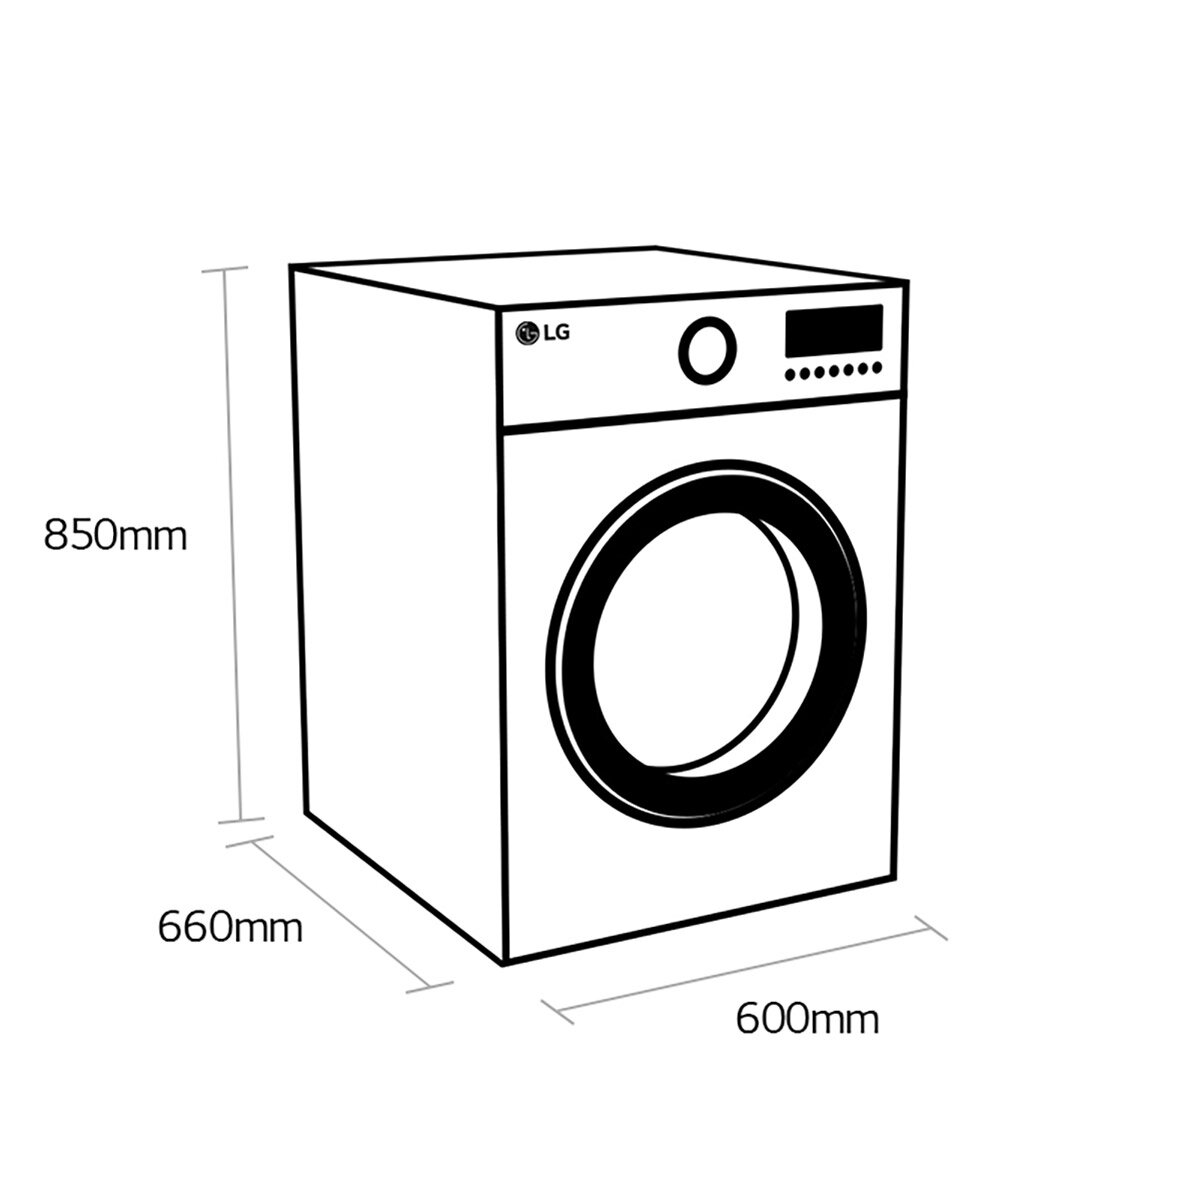 Dimensions for LG FDV709W 9kg Heat pump dryer, A++ Rated in White